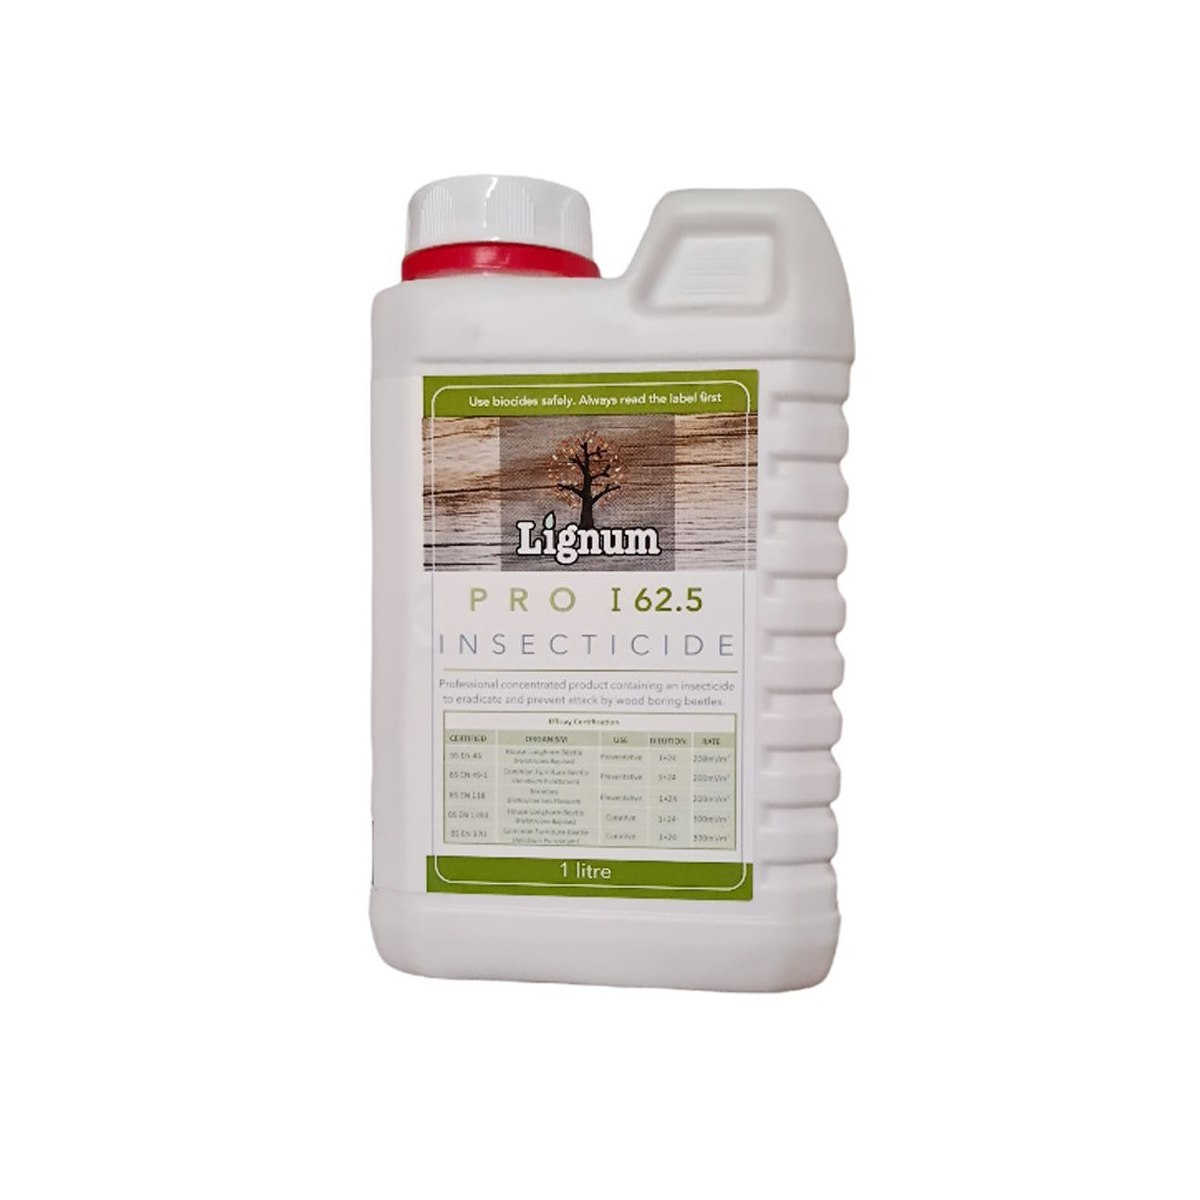 Lignum Pro I62.5 Professional Concentrated Insecticide 1 Litre